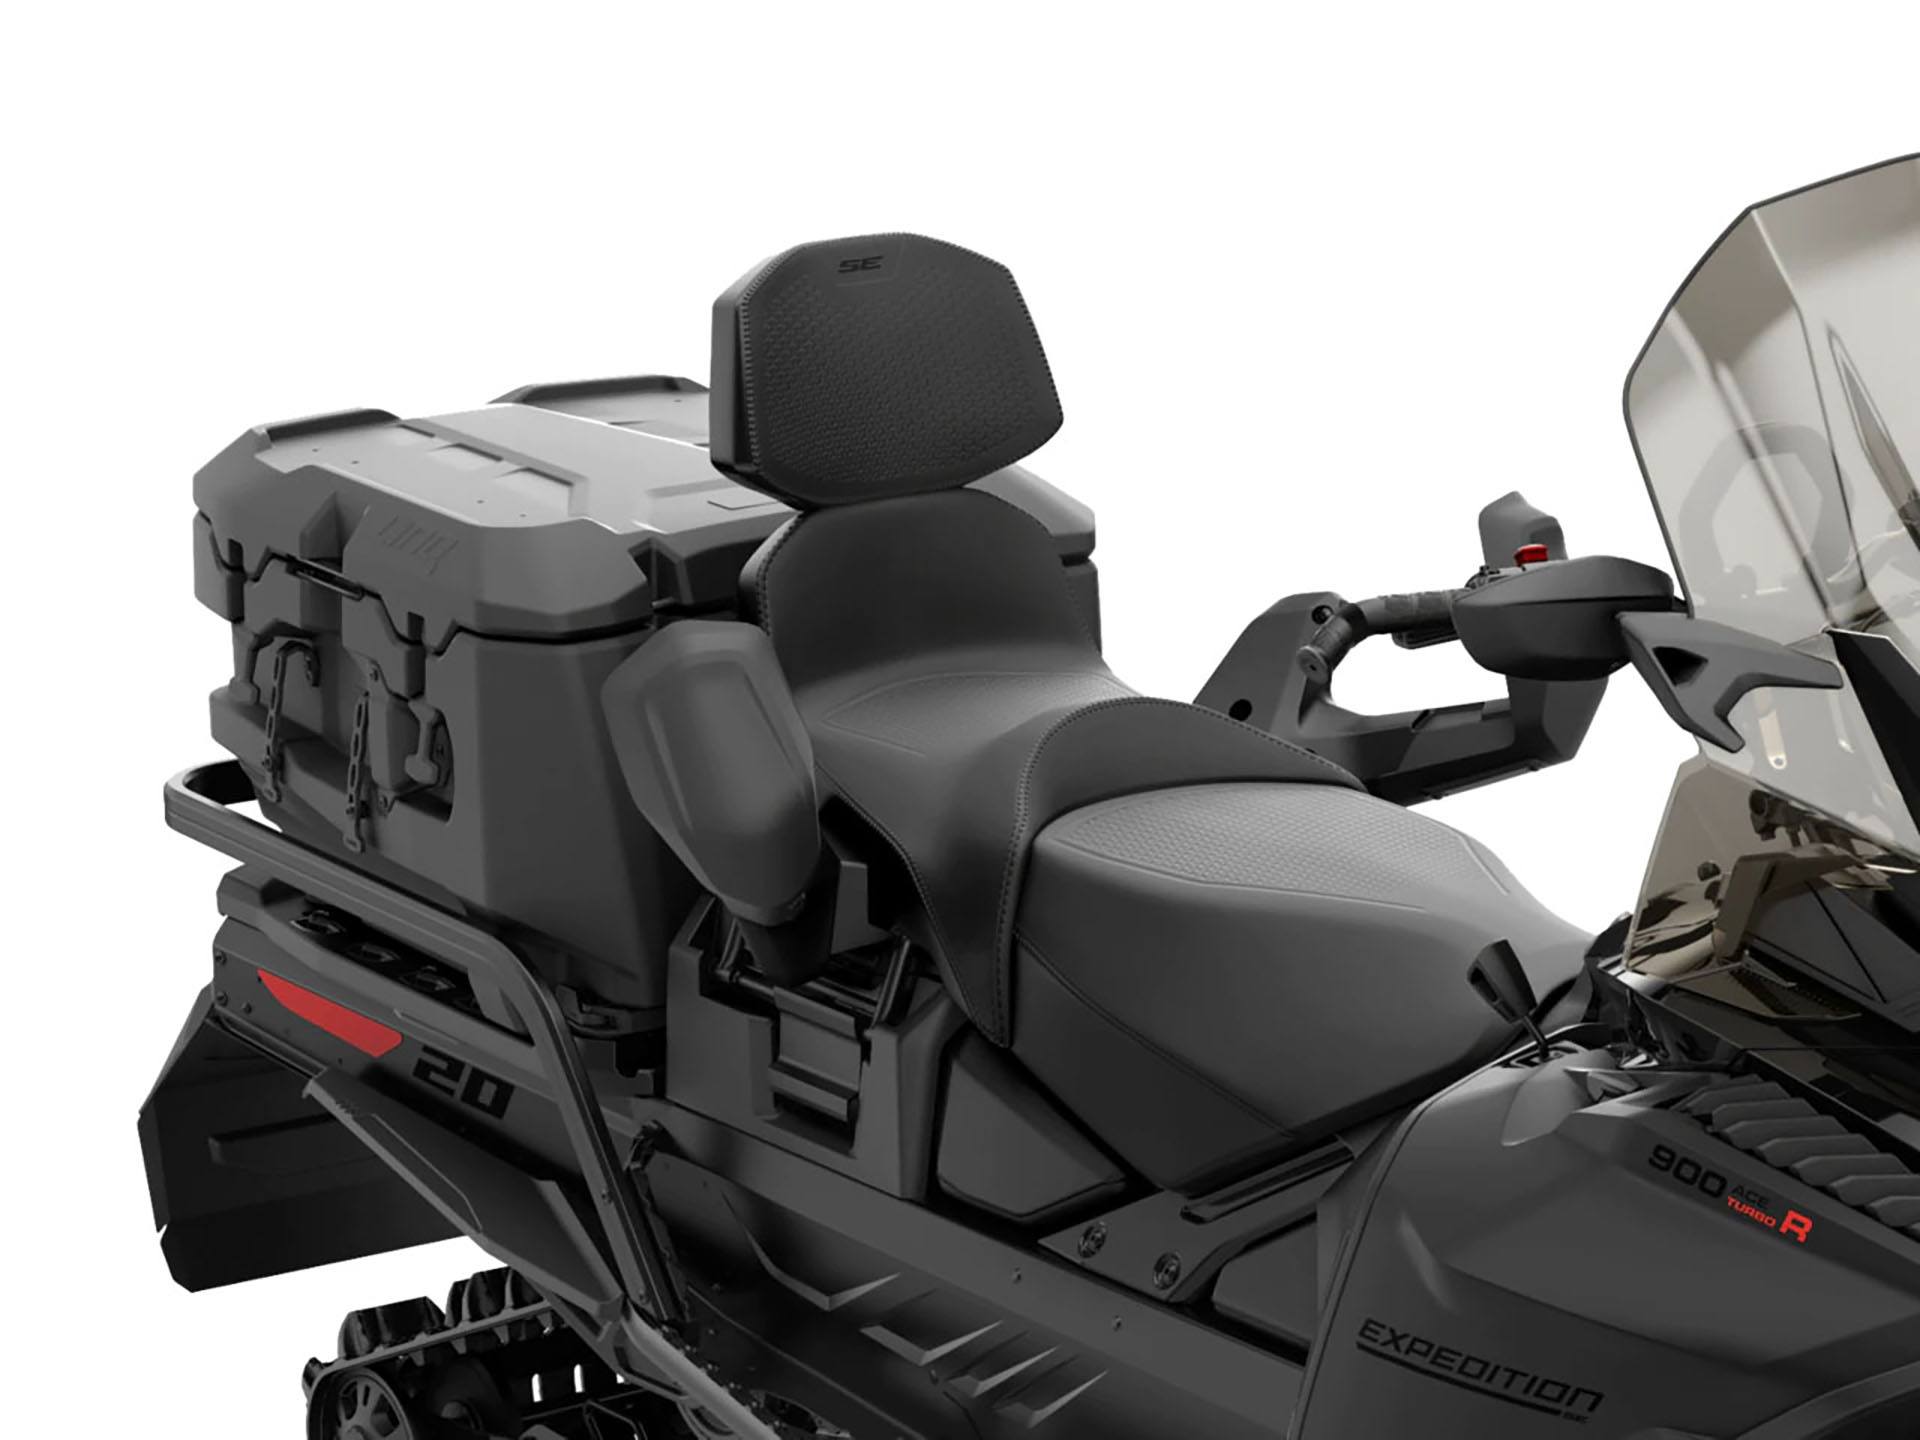 2024 Ski-Doo Expedition LE 900 ACE Turbo ES Silent Cobra WT 1.5 Track 24 in. in Elma, New York - Photo 6